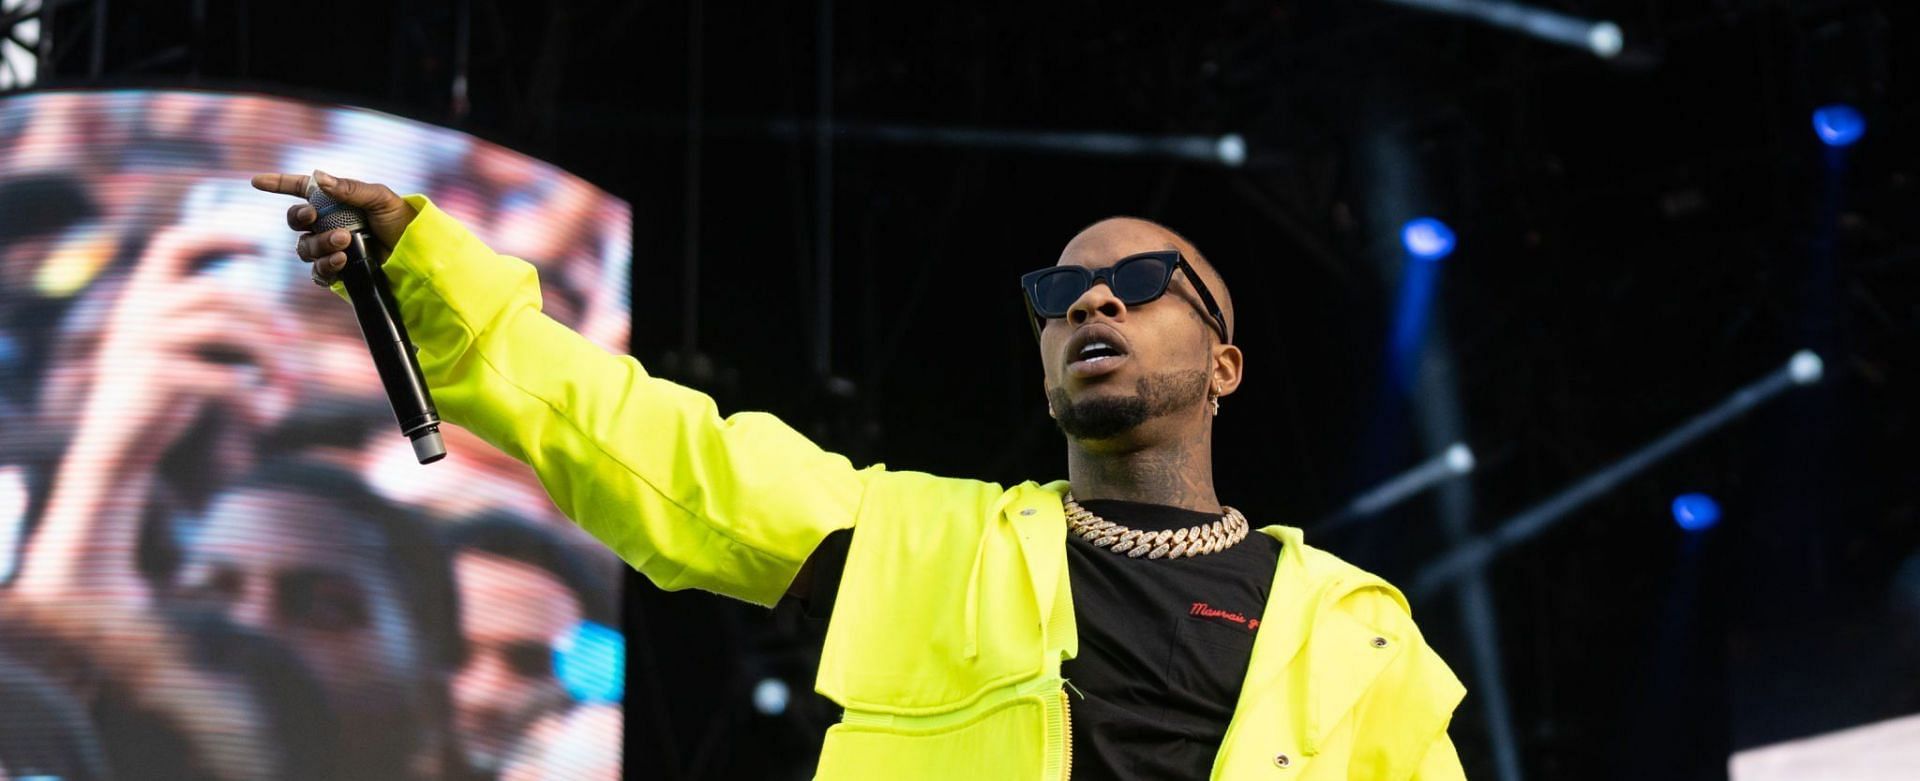 Tory Lanez can face up to 22 years and eight months in prison for shooting Megan Thee Stallion in the foot (Image via Getty Images)